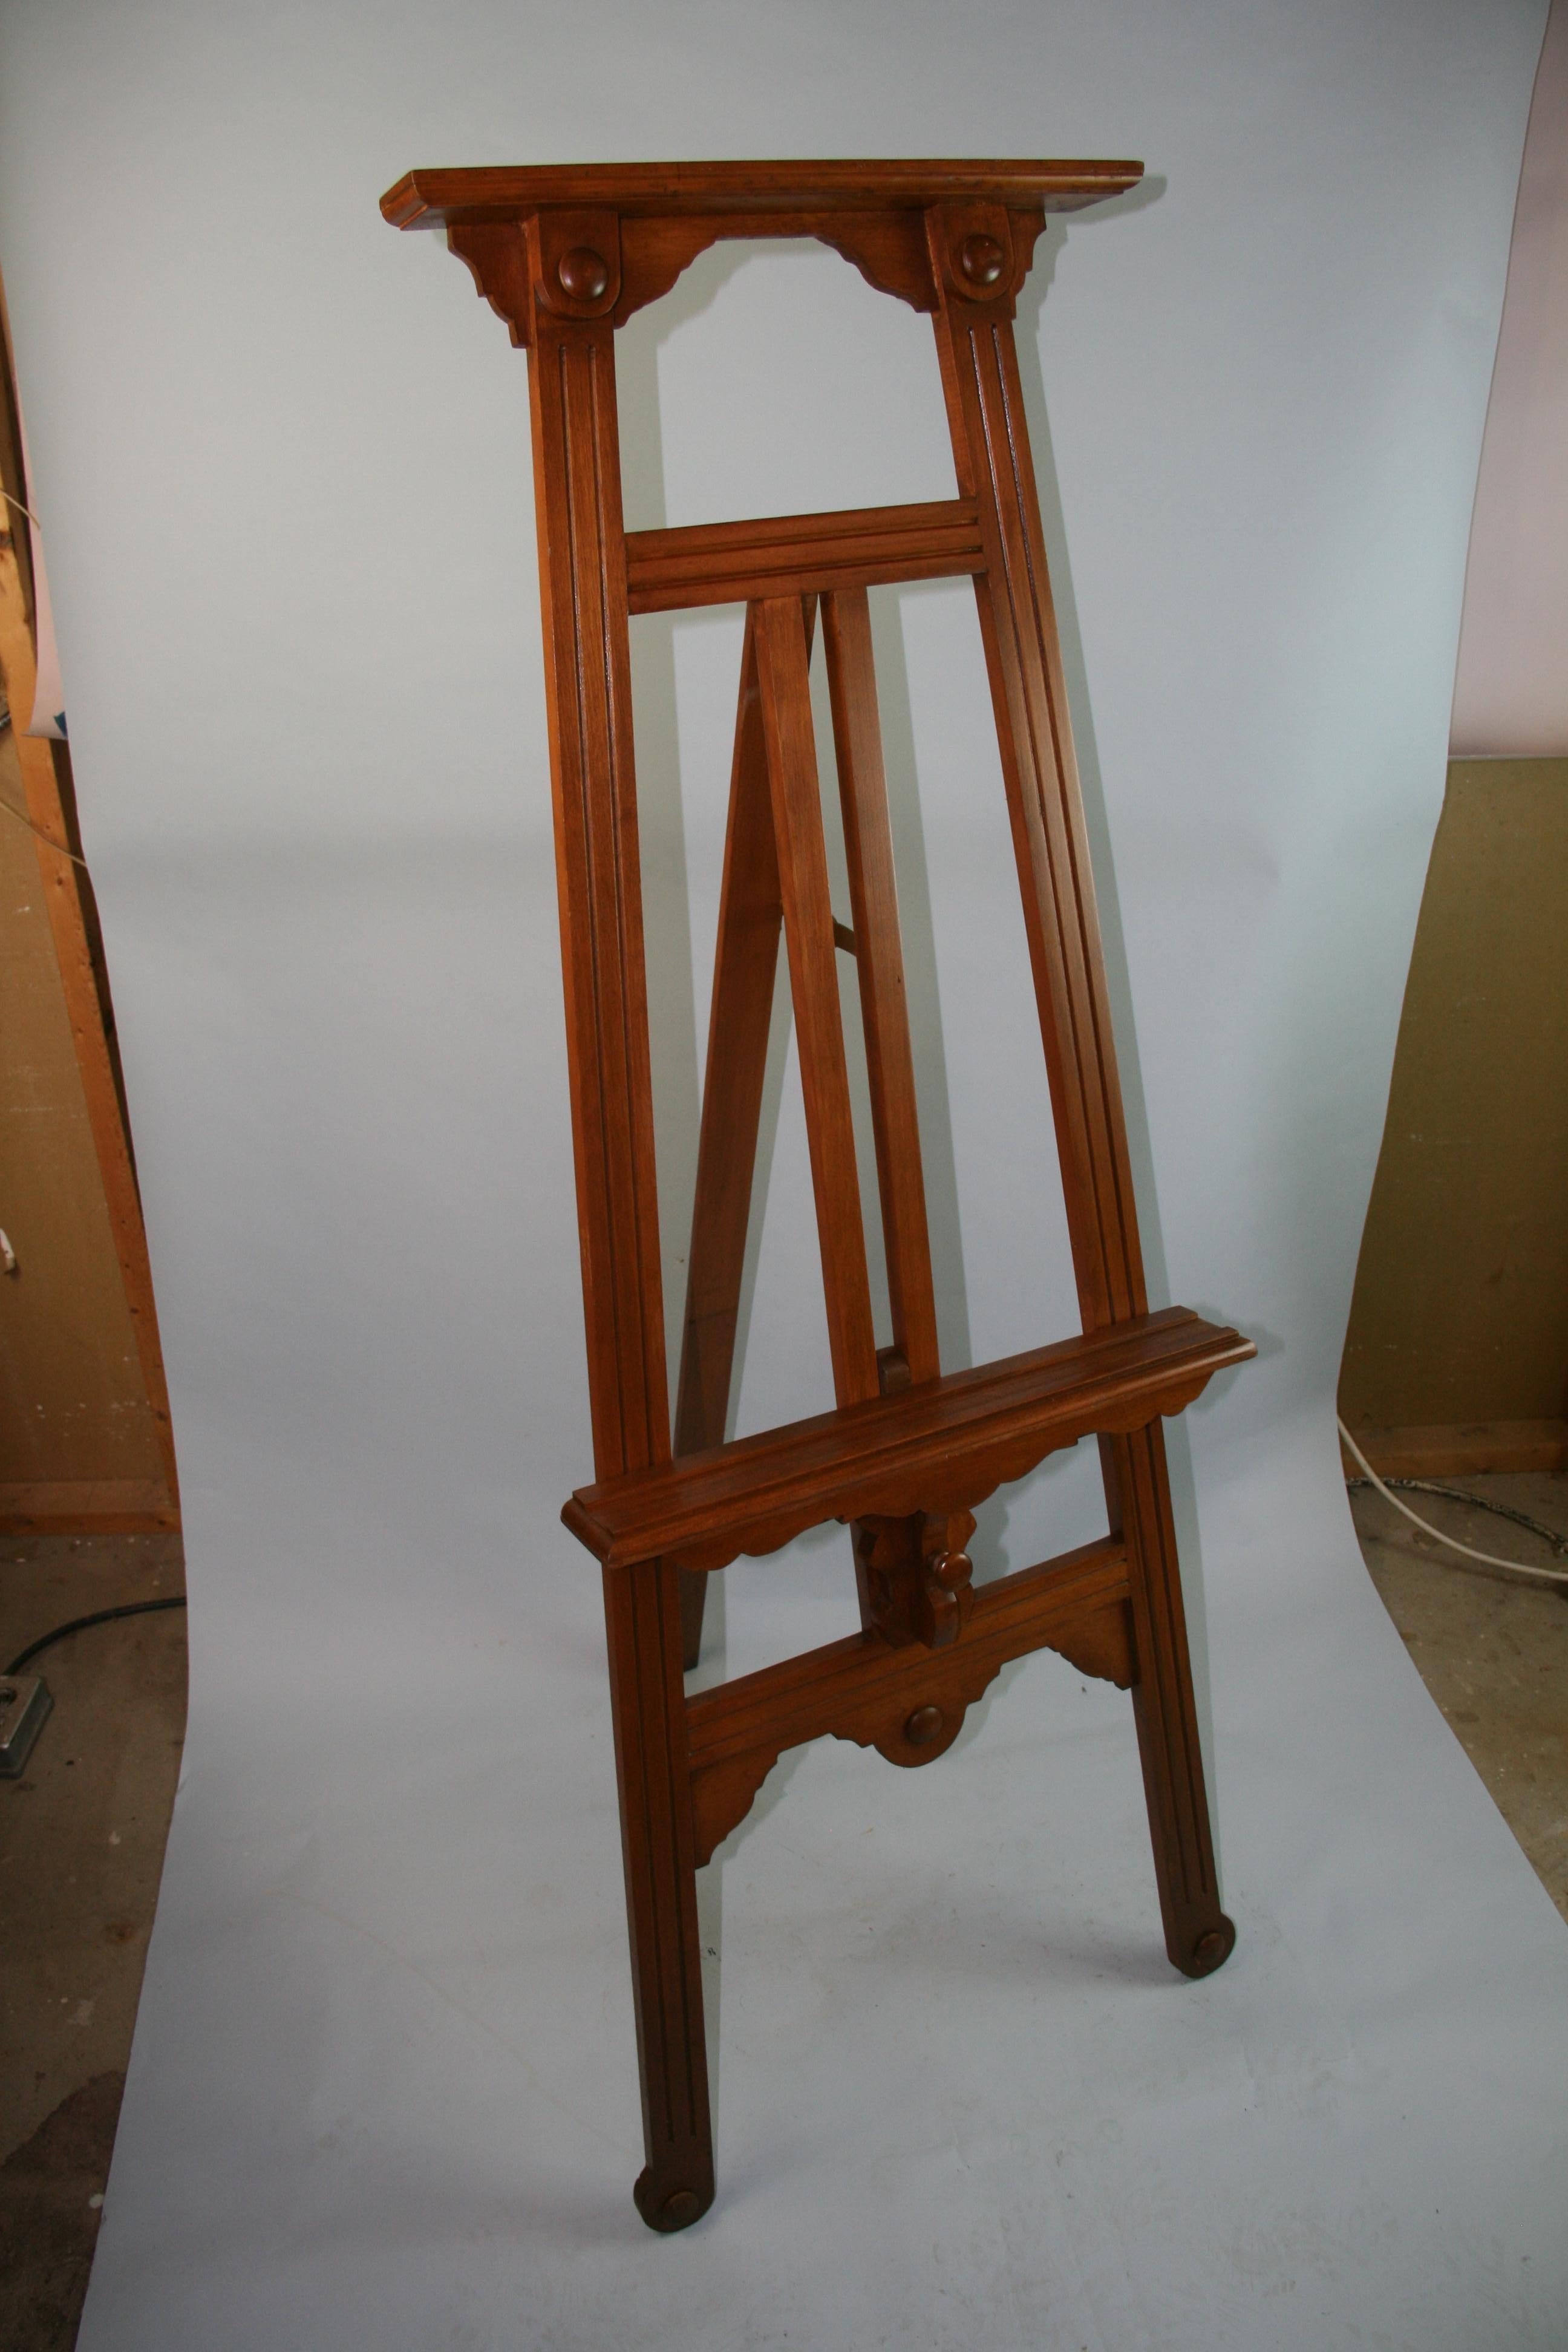 Stylish Empire Revival 20th Century Floor Easel Artist Display Stand For Sale 2